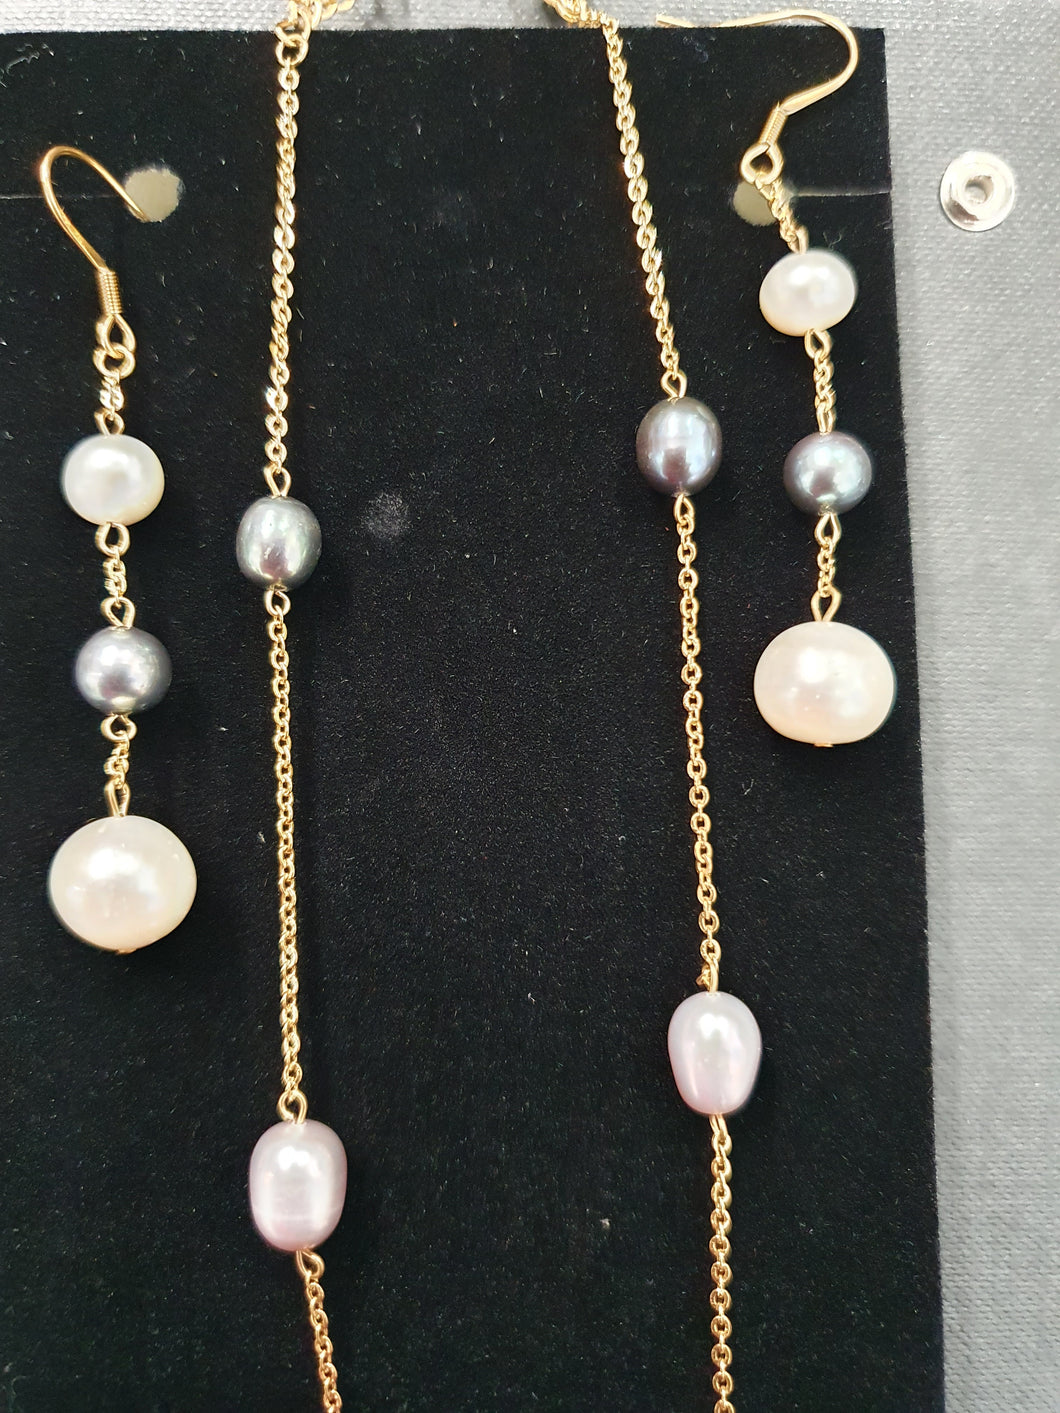 Stainless steel necklace and earrings with fresh water pearls